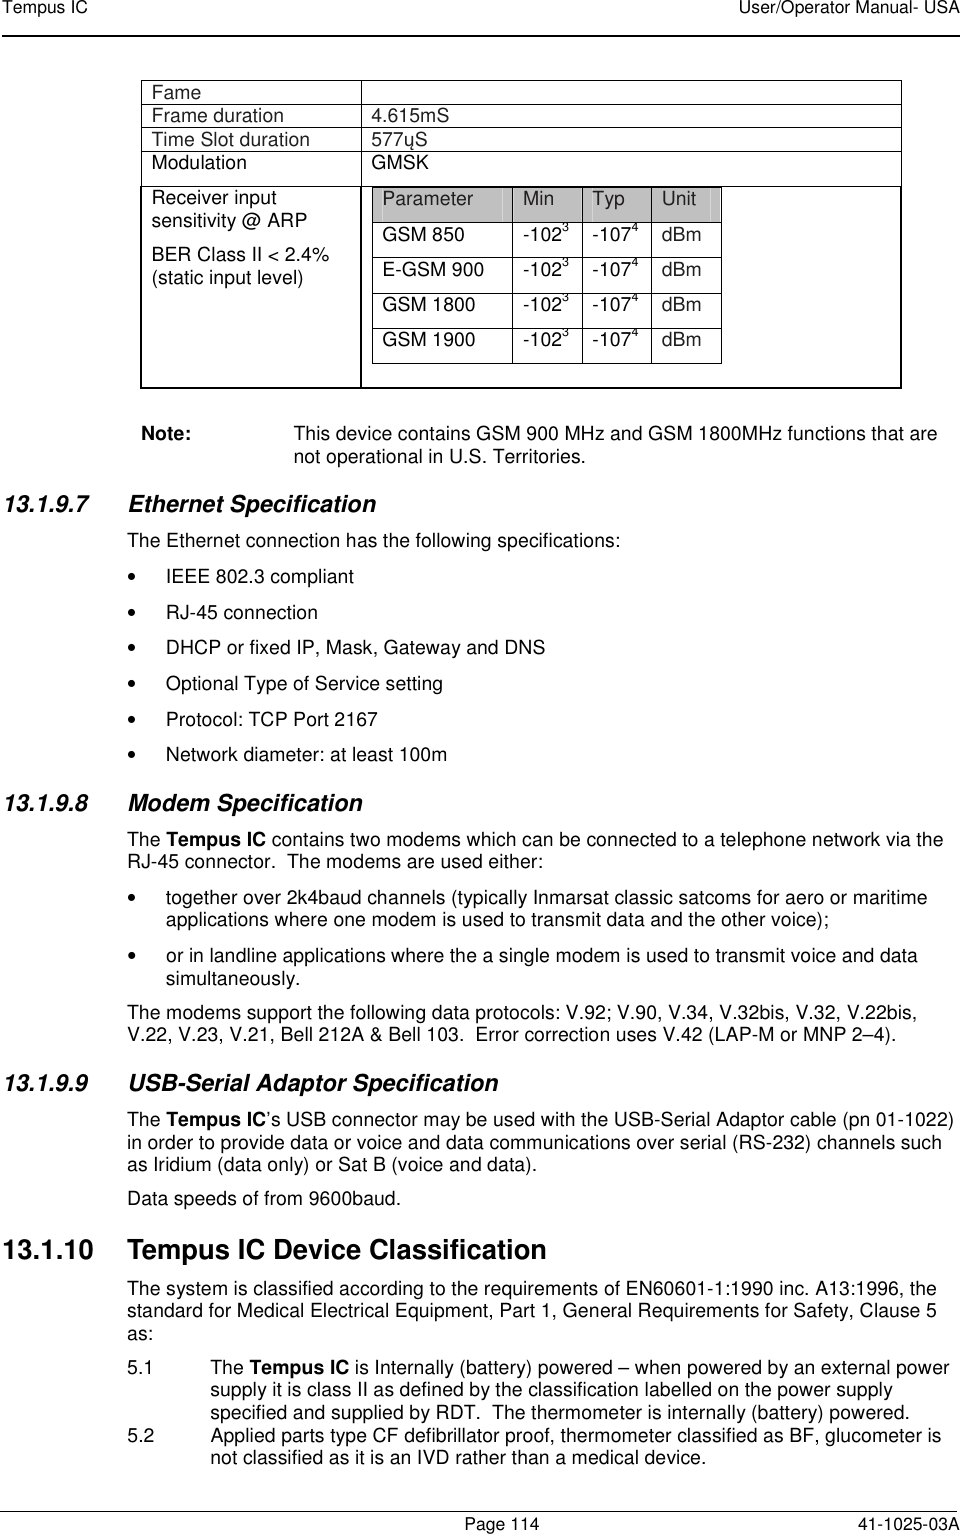 Tempus IC    User/Operator Manual- USA        Page 114   41-1025-03A Fame  Frame duration   4.615mS Time Slot duration   577ųS Modulation  GMSK  Receiver input sensitivity @ ARP BER Class II &lt; 2.4% (static input level)  Parameter  Min  Typ  Unit GSM 850  -1023  -1074 dBm E-GSM 900  -1023  -1074 dBm GSM 1800  -1023  -1074 dBm GSM 1900  -1023  -1074 dBm   Note:  This device contains GSM 900 MHz and GSM 1800MHz functions that are not operational in U.S. Territories. 13.1.9.7  Ethernet Specification The Ethernet connection has the following specifications: •  IEEE 802.3 compliant  •  RJ-45 connection •  DHCP or fixed IP, Mask, Gateway and DNS •  Optional Type of Service setting •  Protocol: TCP Port 2167 •  Network diameter: at least 100m 13.1.9.8  Modem Specification The Tempus IC contains two modems which can be connected to a telephone network via the RJ-45 connector.  The modems are used either: •  together over 2k4baud channels (typically Inmarsat classic satcoms for aero or maritime applications where one modem is used to transmit data and the other voice); •  or in landline applications where the a single modem is used to transmit voice and data simultaneously. The modems support the following data protocols: V.92; V.90, V.34, V.32bis, V.32, V.22bis, V.22, V.23, V.21, Bell 212A &amp; Bell 103.  Error correction uses V.42 (LAP-M or MNP 2–4). 13.1.9.9  USB-Serial Adaptor Specification The Tempus IC’s USB connector may be used with the USB-Serial Adaptor cable (pn 01-1022) in order to provide data or voice and data communications over serial (RS-232) channels such as Iridium (data only) or Sat B (voice and data). Data speeds of from 9600baud. 13.1.10  Tempus IC Device Classification The system is classified according to the requirements of EN60601-1:1990 inc. A13:1996, the standard for Medical Electrical Equipment, Part 1, General Requirements for Safety, Clause 5 as: 5.1  The Tempus IC is Internally (battery) powered – when powered by an external power supply it is class II as defined by the classification labelled on the power supply specified and supplied by RDT.  The thermometer is internally (battery) powered. 5.2  Applied parts type CF defibrillator proof, thermometer classified as BF, glucometer is not classified as it is an IVD rather than a medical device. 